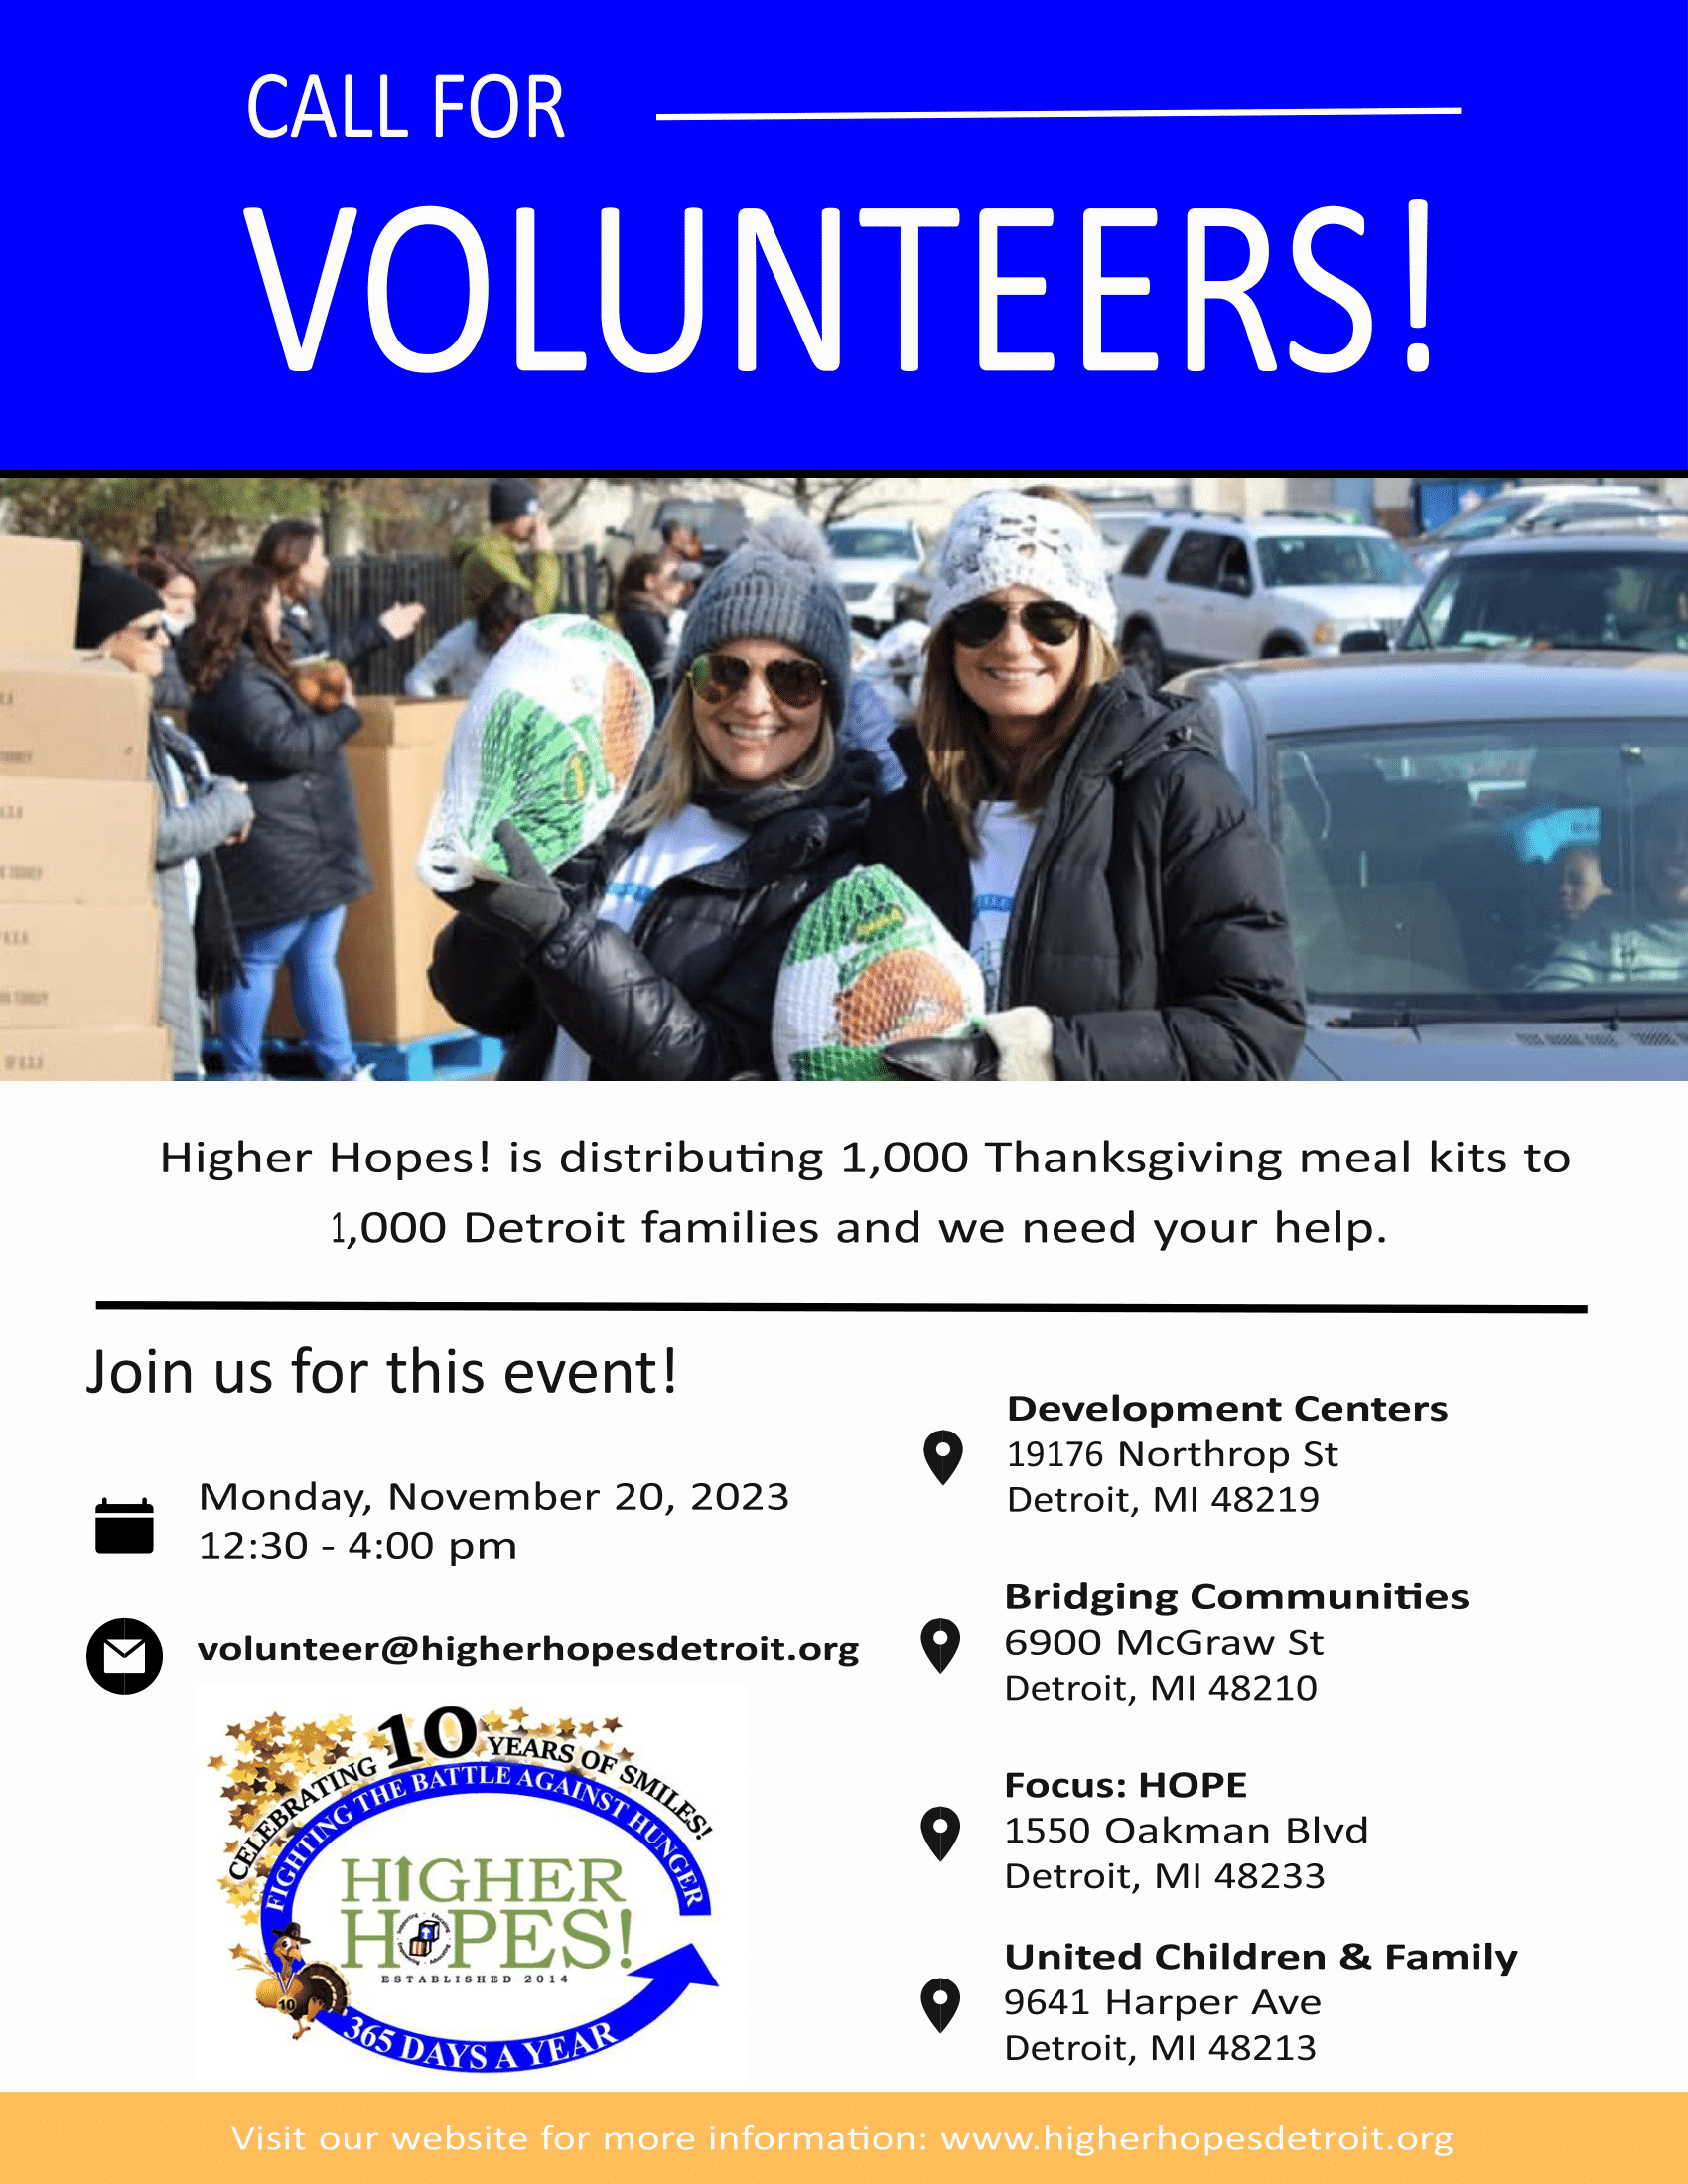 Call for Volunteer flyer with image